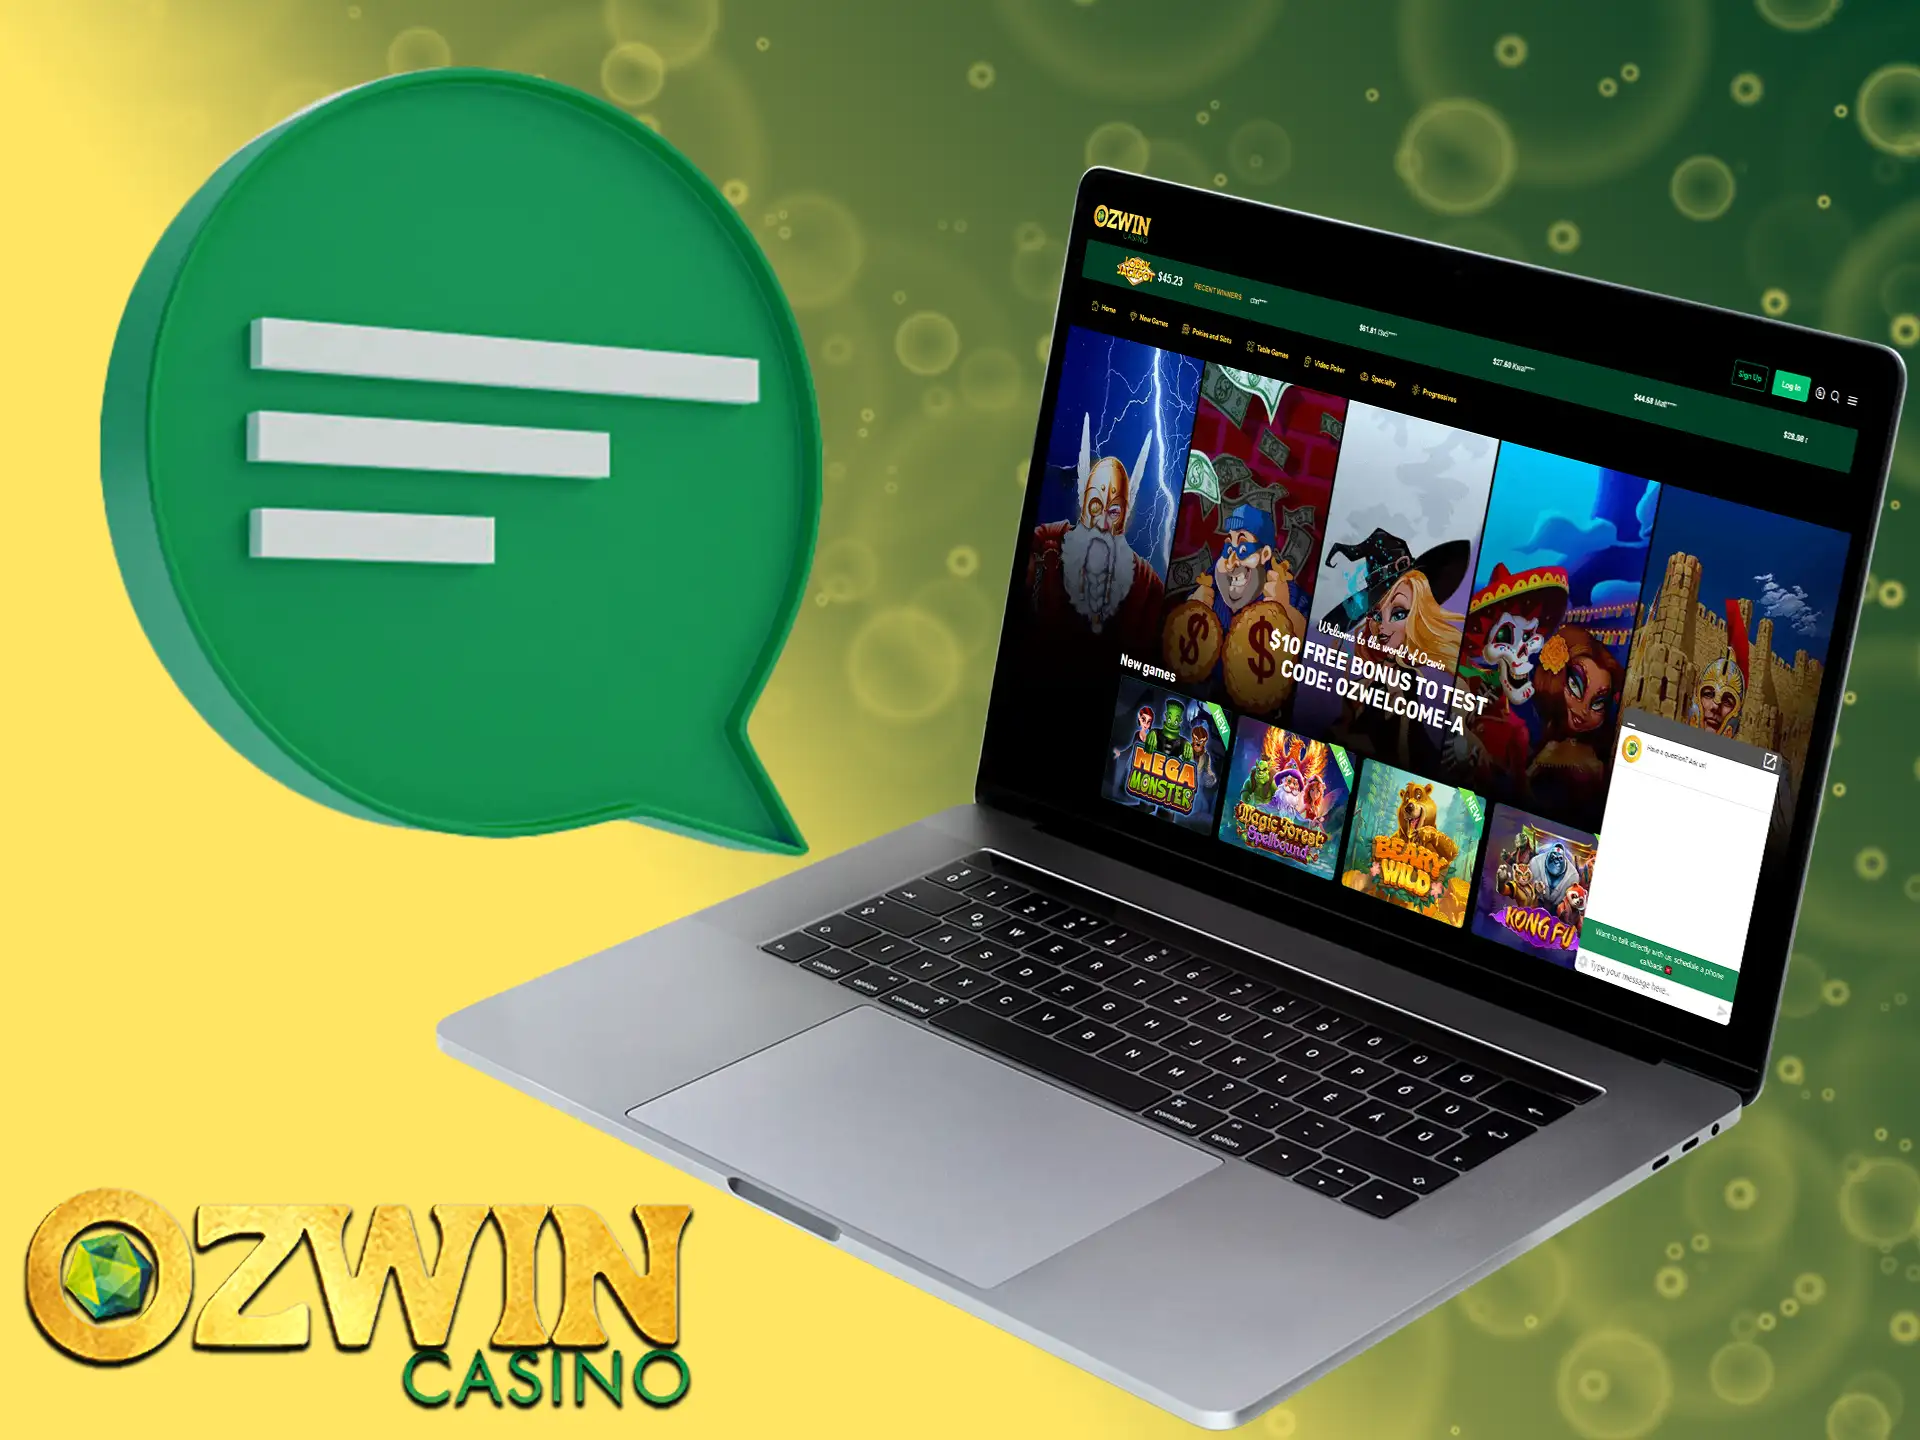 Ozwin Casino offers a 24/7 live chat feature just for you.